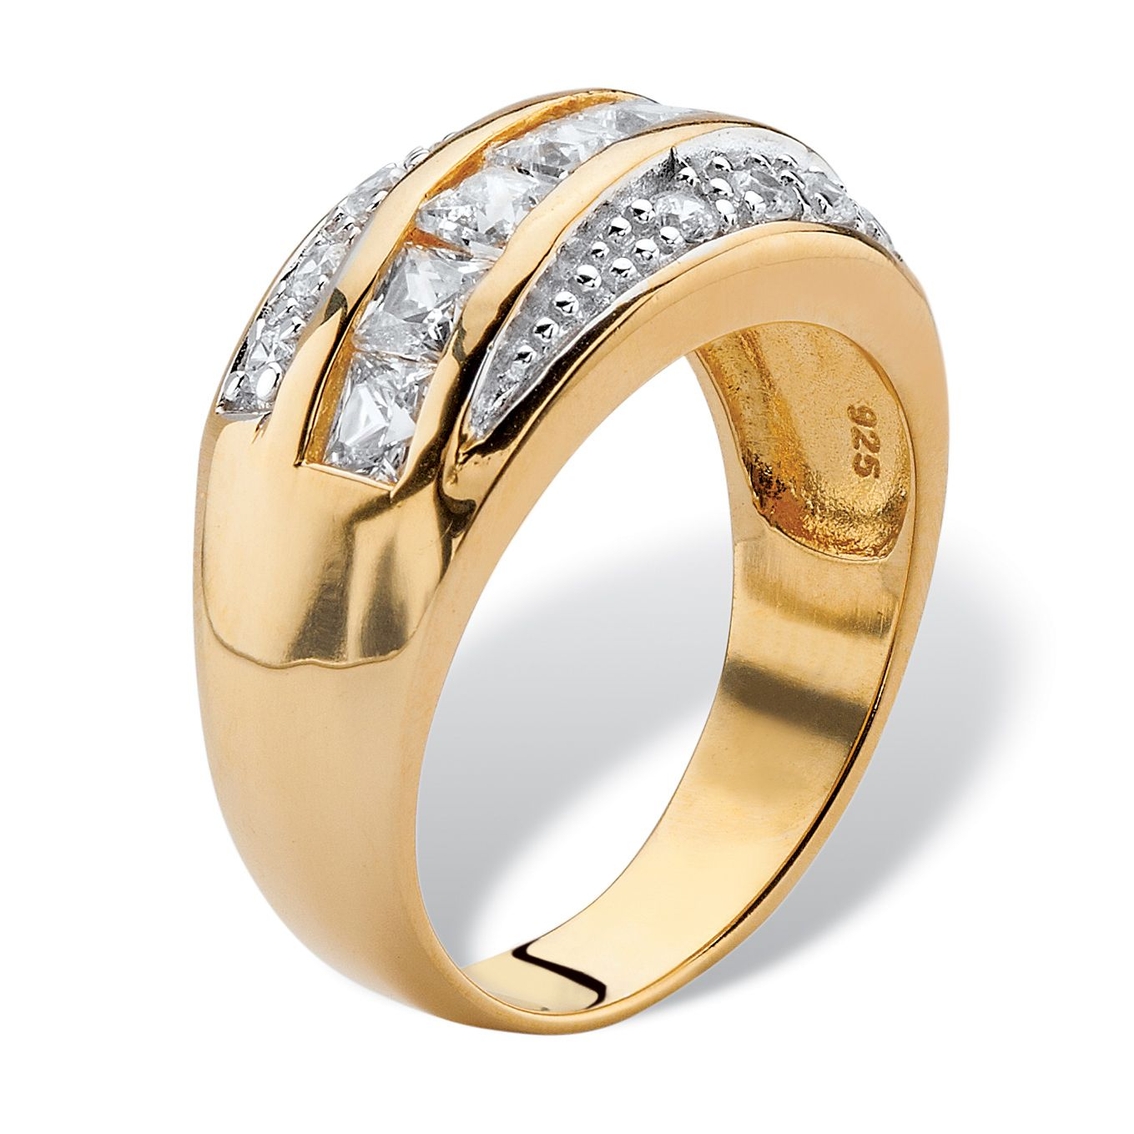 PalmBeach Men's 1.32 Cttw. Cubic Zirconia Gold-plated Sterling Silver Channel Ring - Image 2 of 5